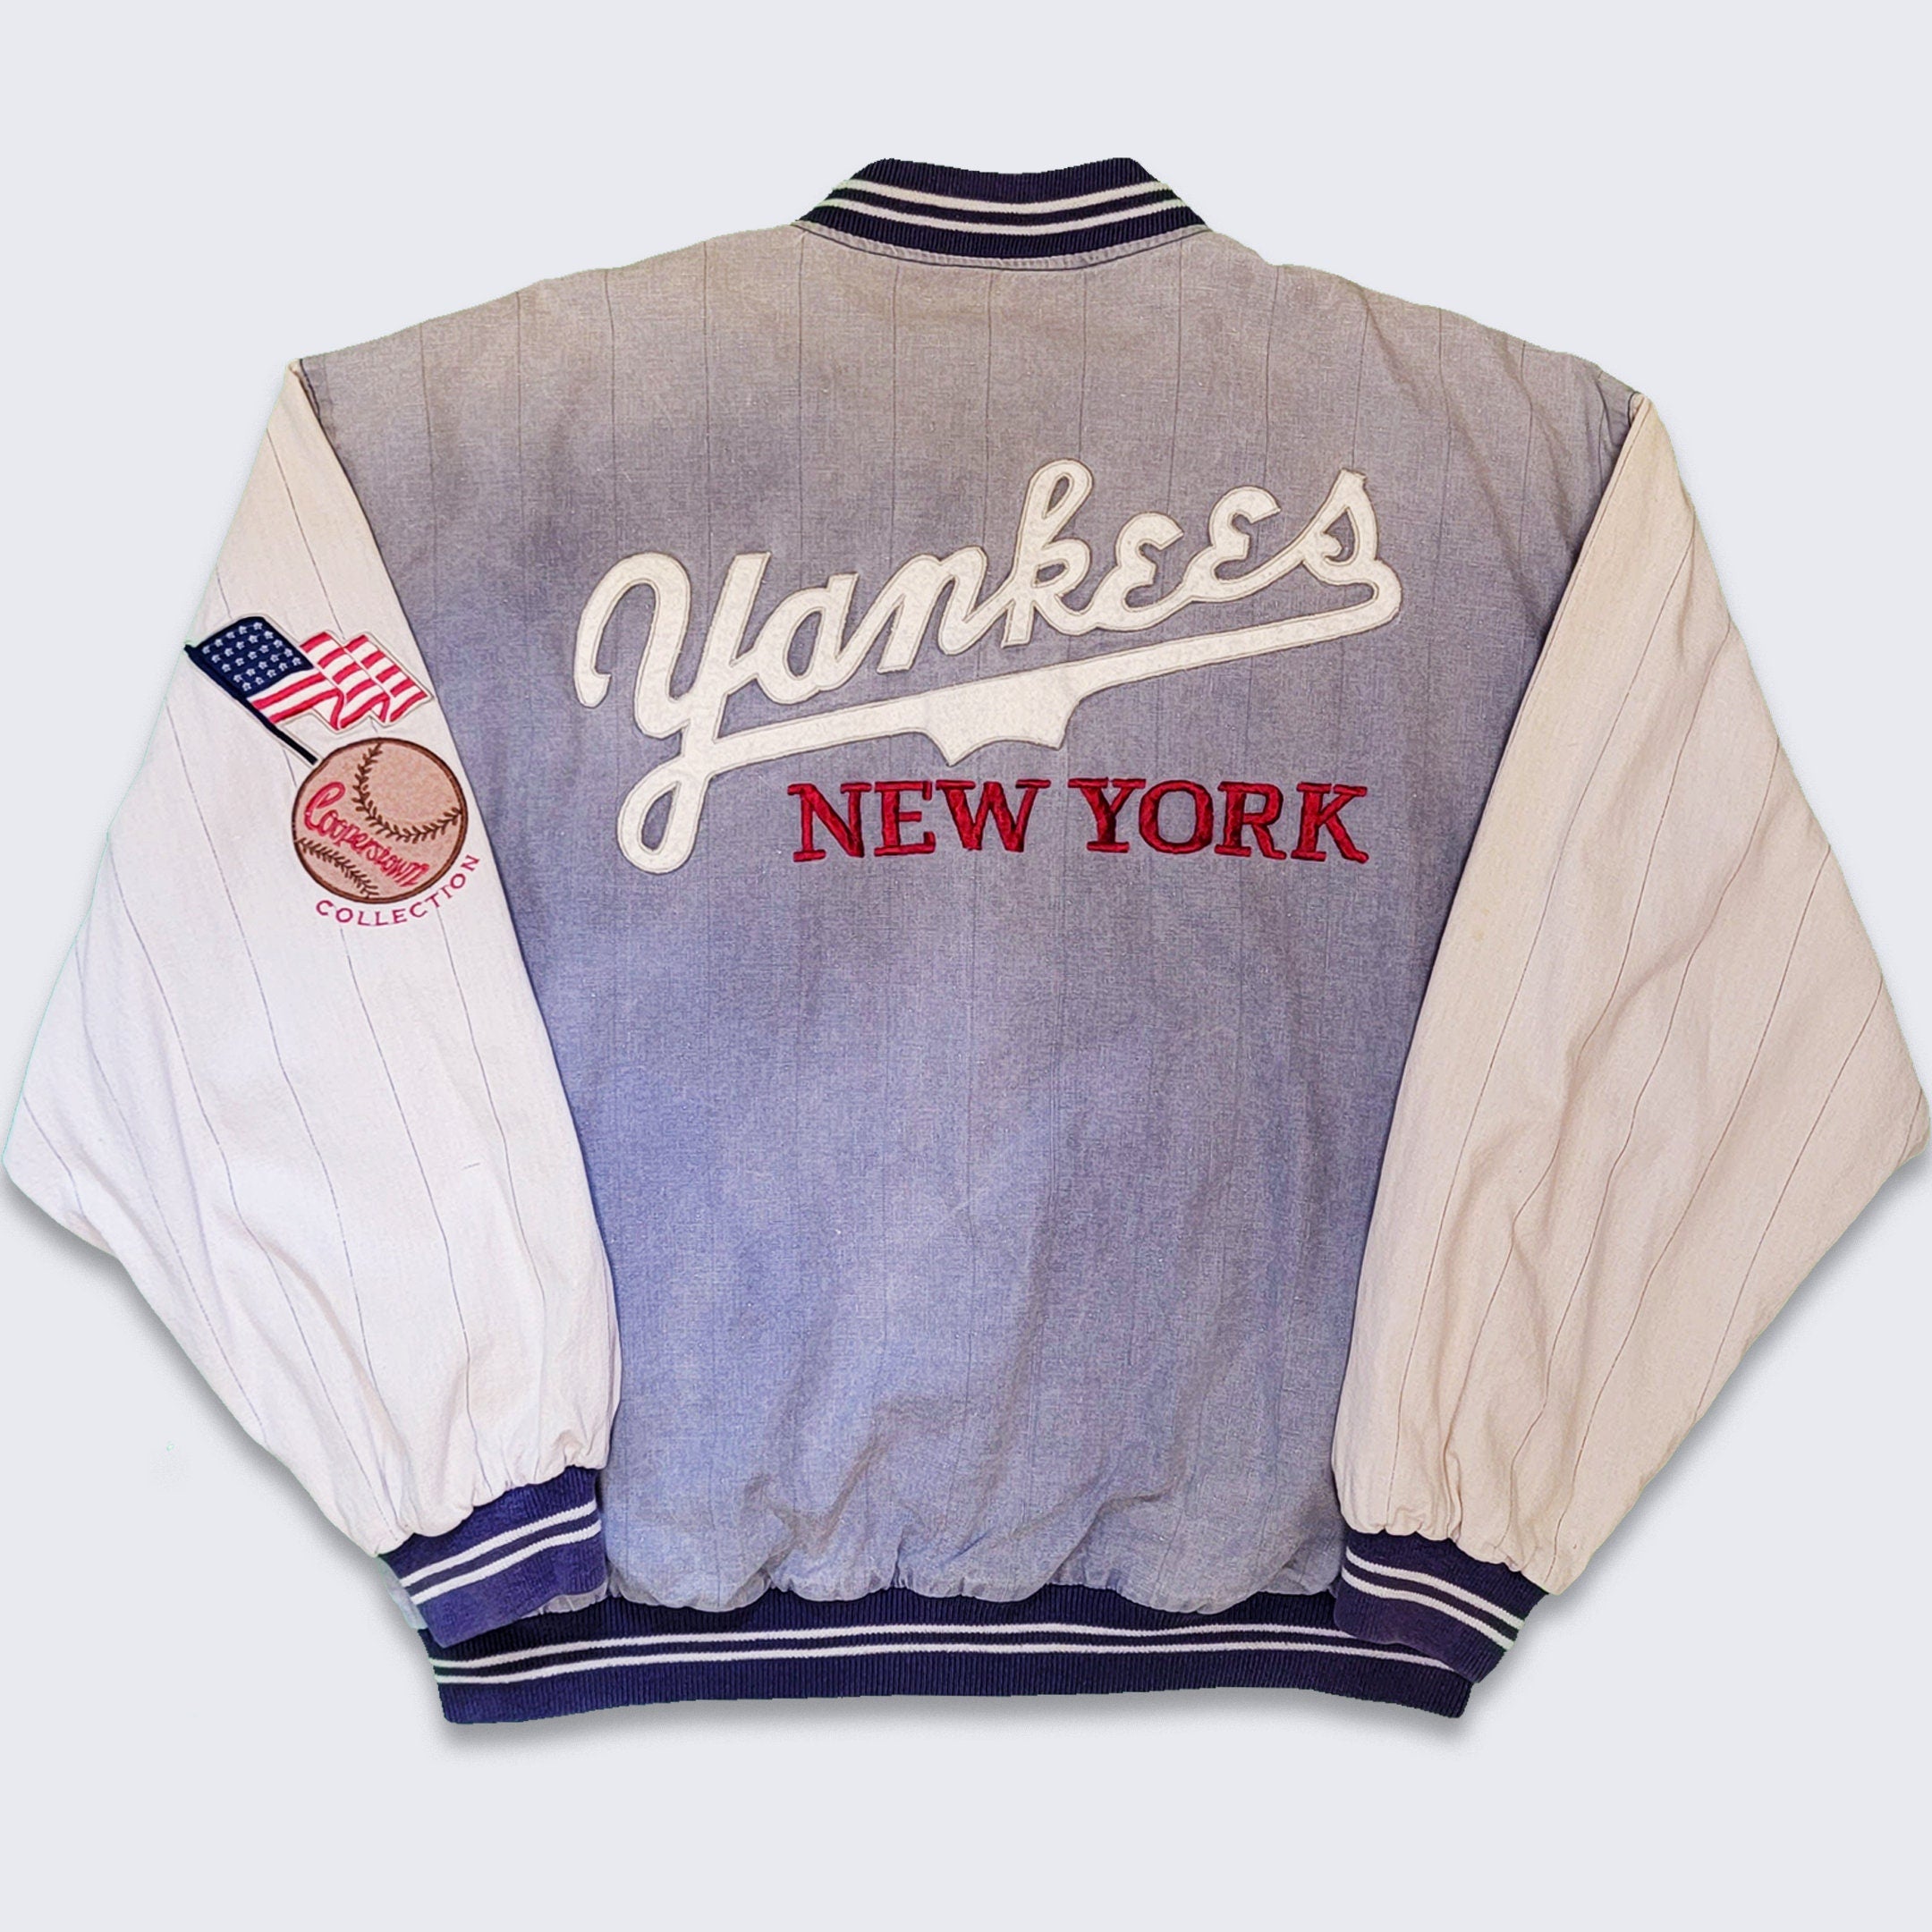 MLB New York Yankees Jacket Red Cooperstown Collection 